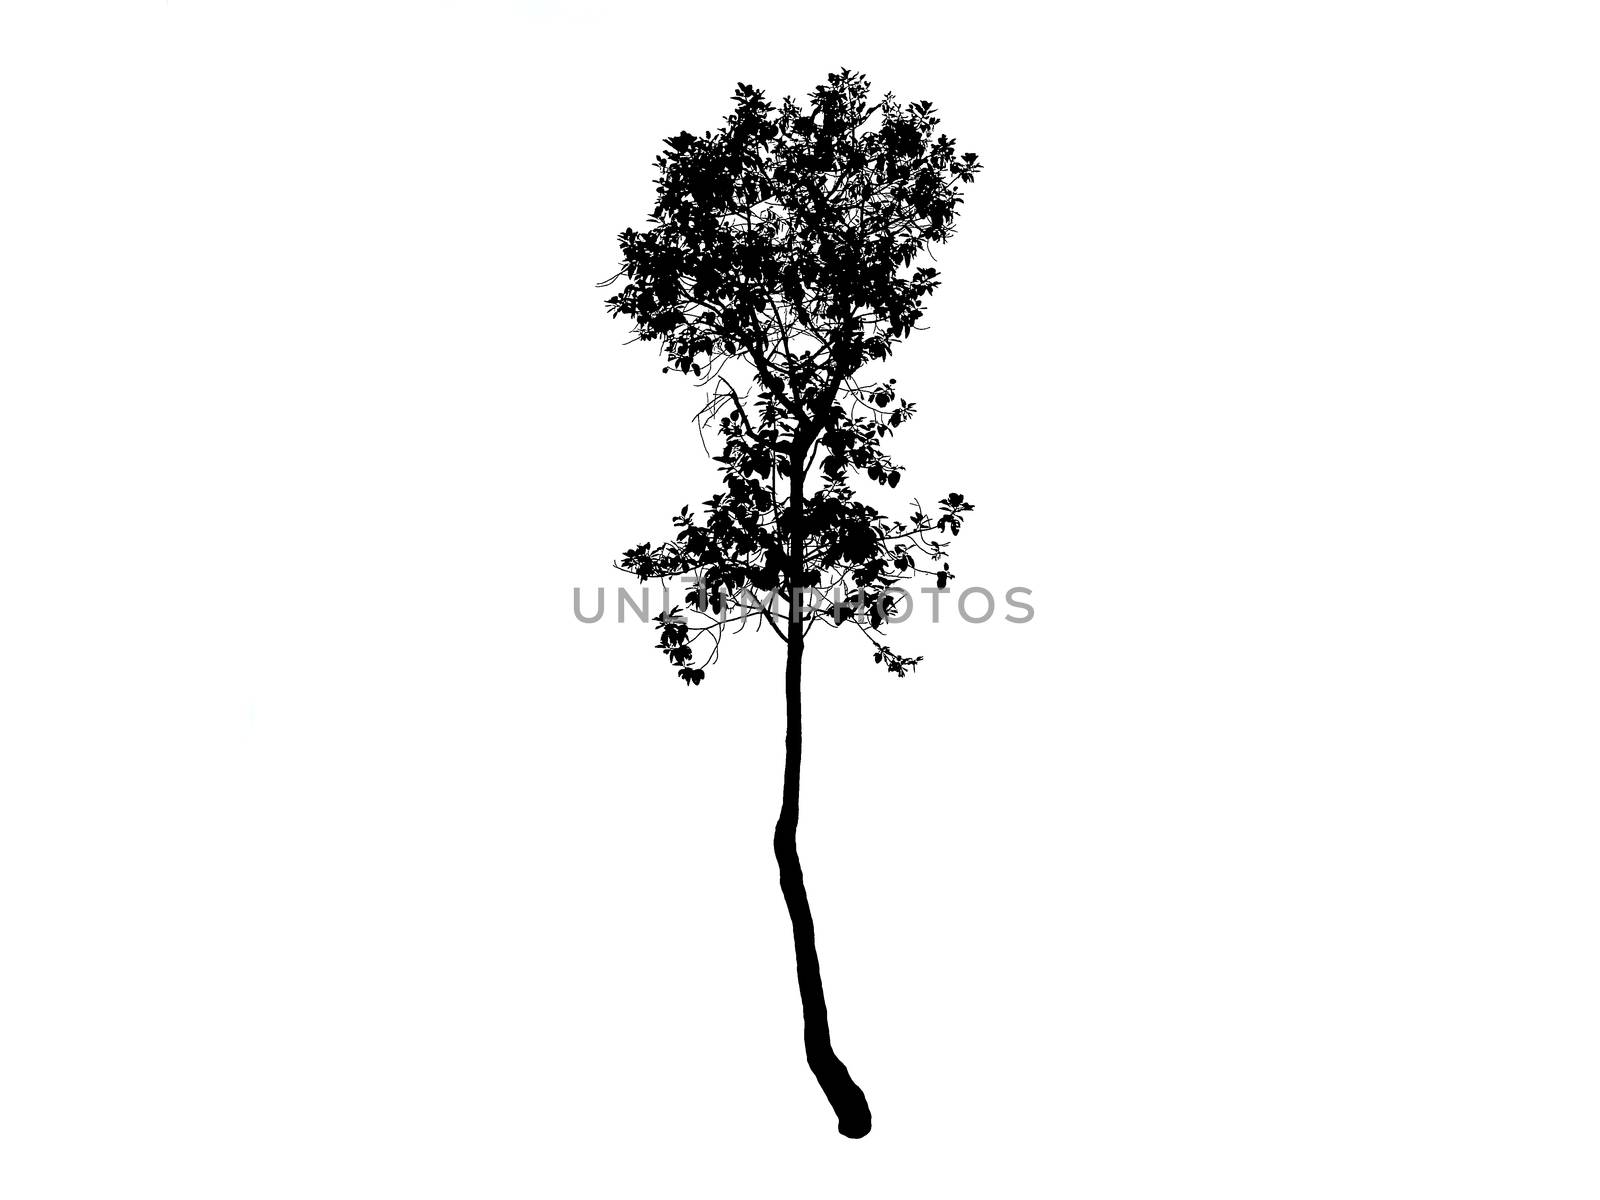 Tree black drawing in white background.